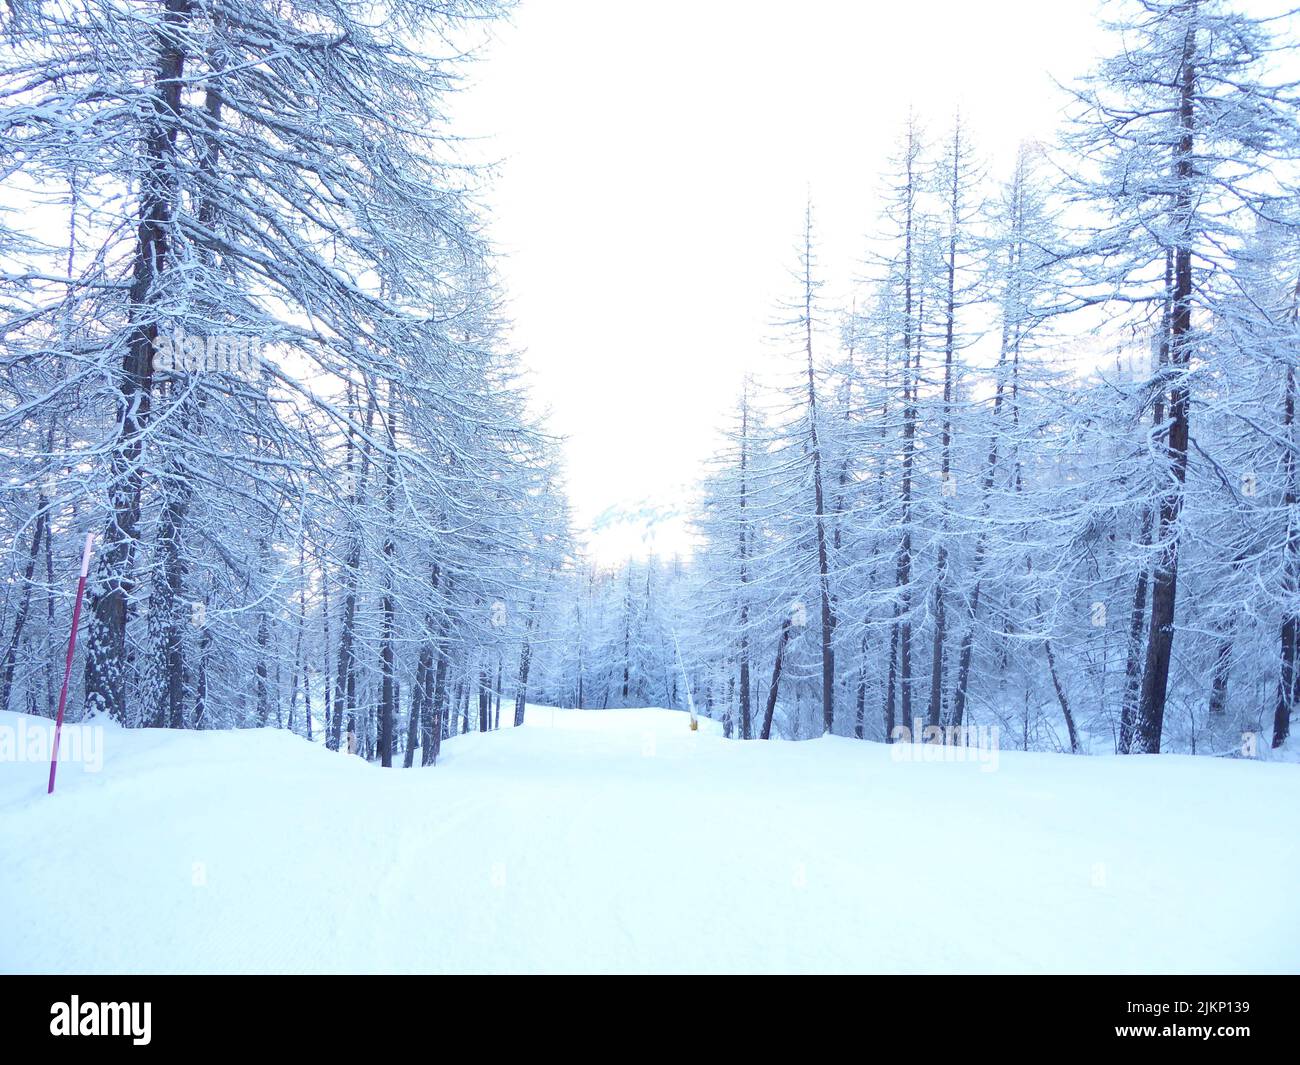 A winter landscape in the forest with the roads and trees all covered in snow Stock Photo